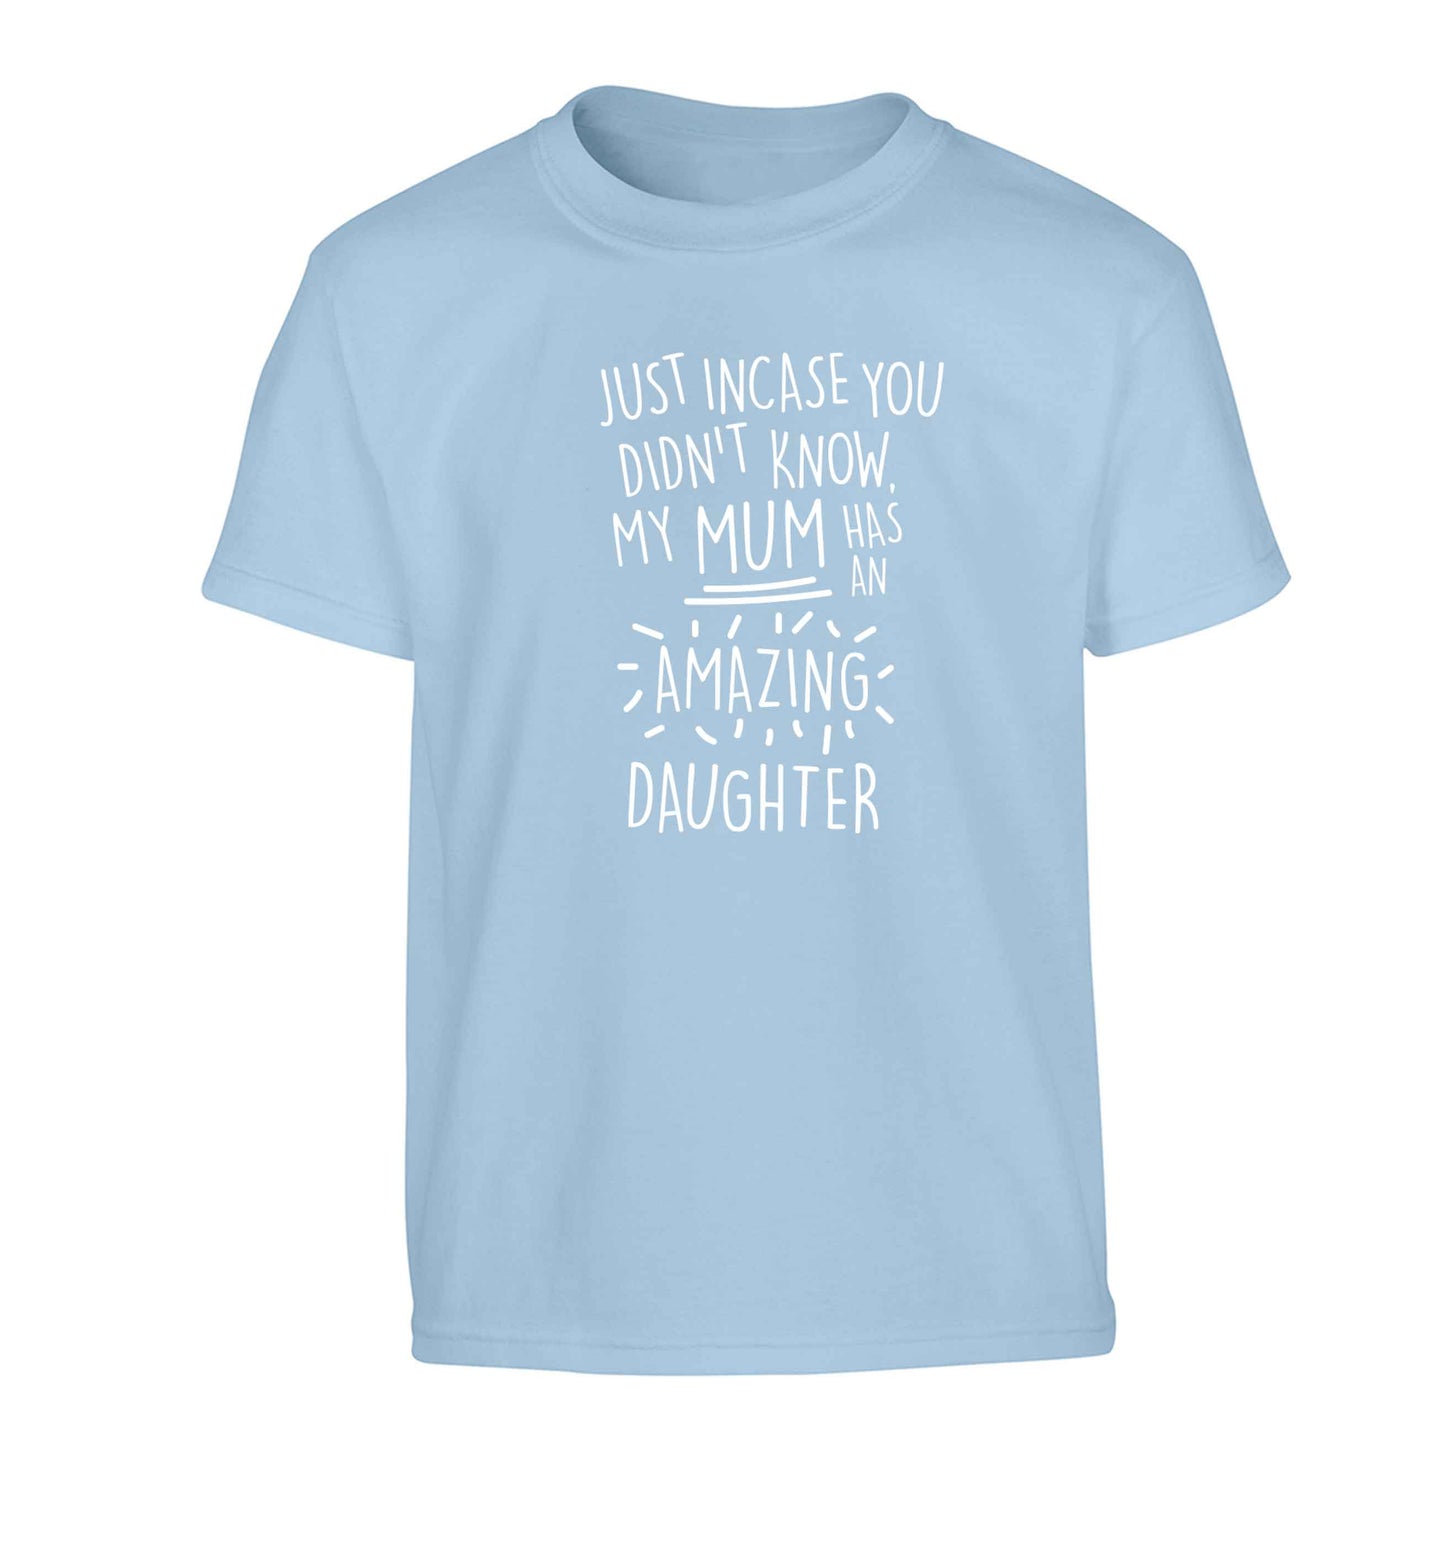 Just incase you didn't know my mum has an amazing daughter Children's light blue Tshirt 12-13 Years